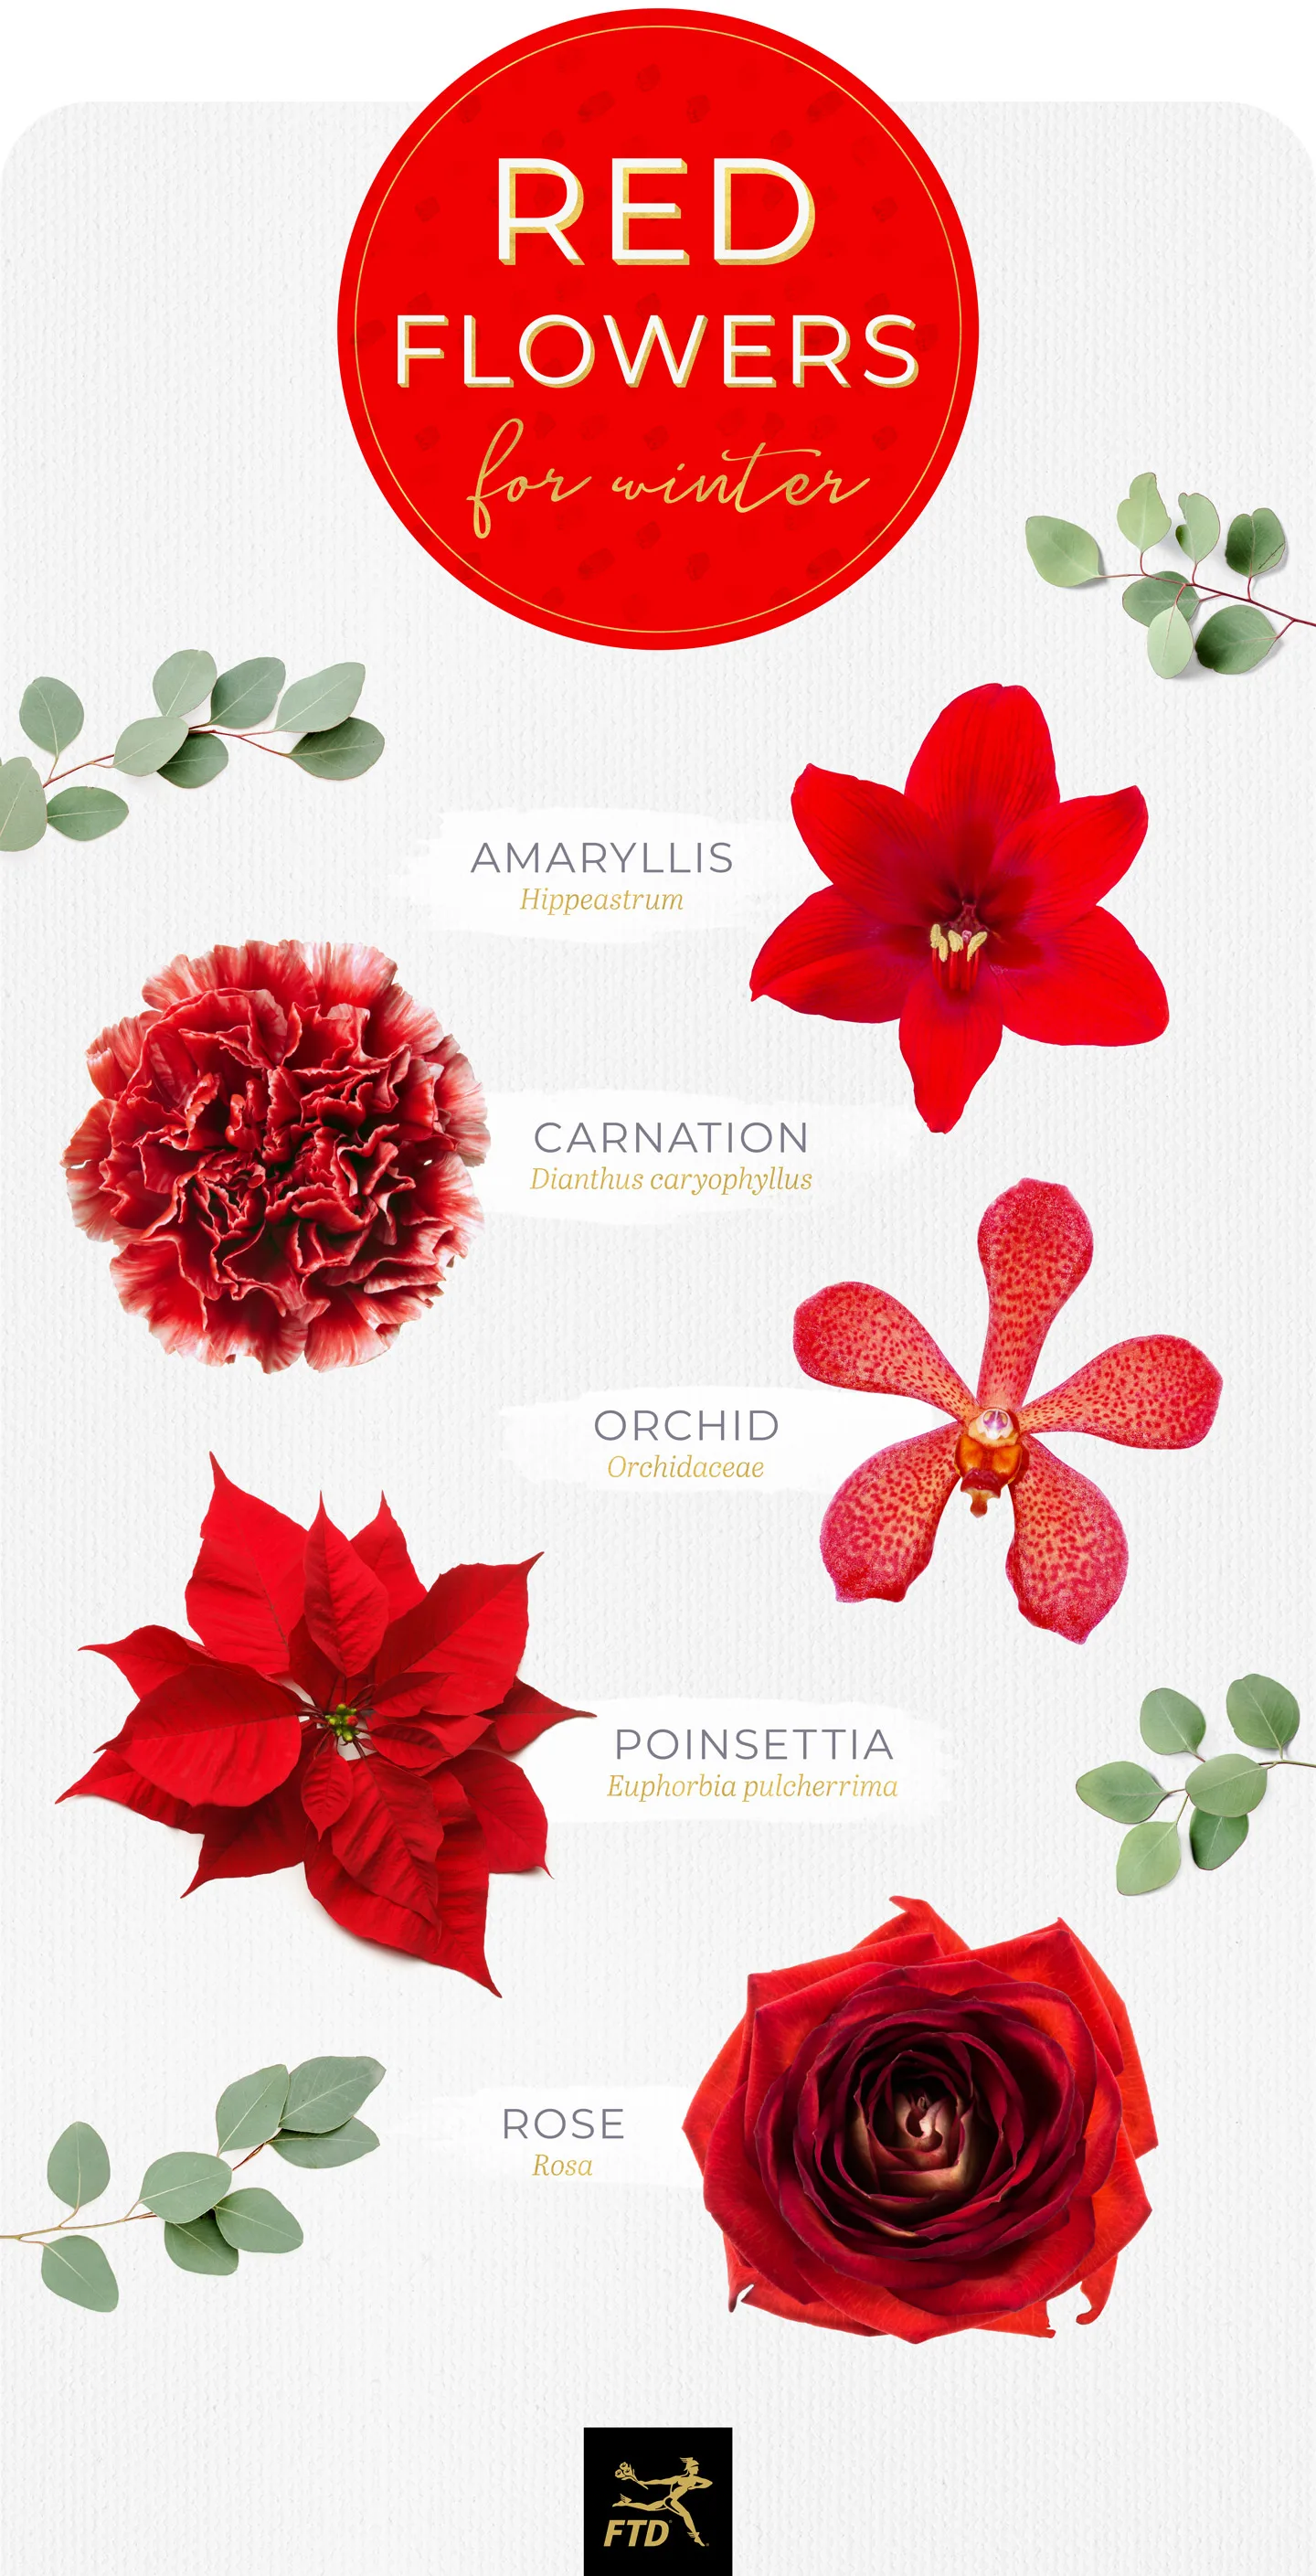 40 Types of Red Flowers